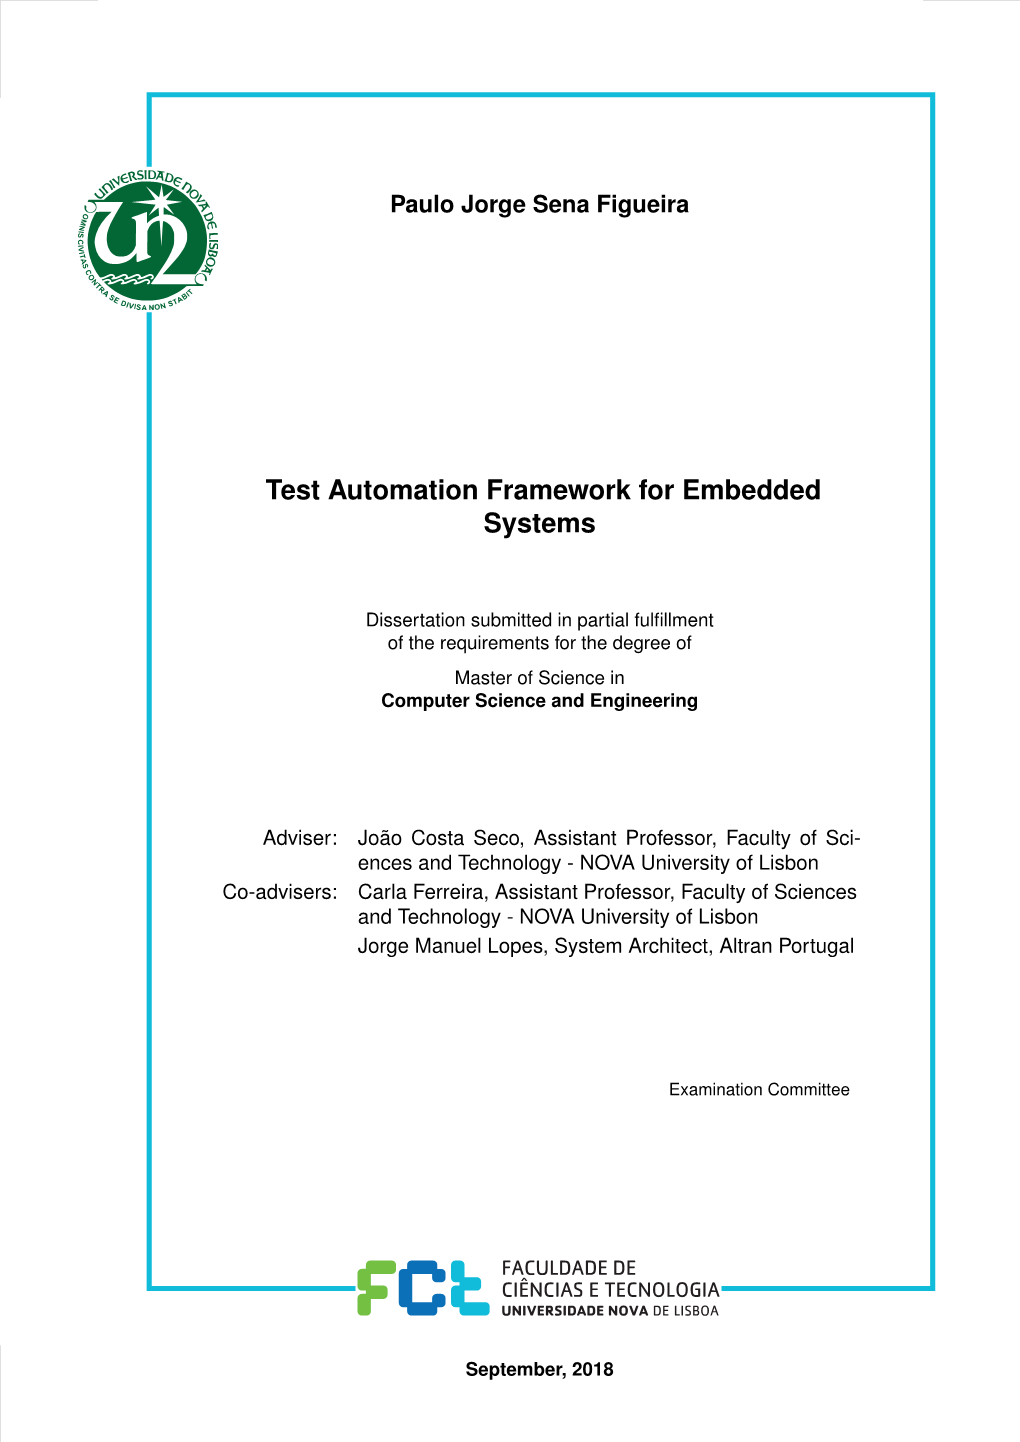 Test Automation Framework for Embedded Systems